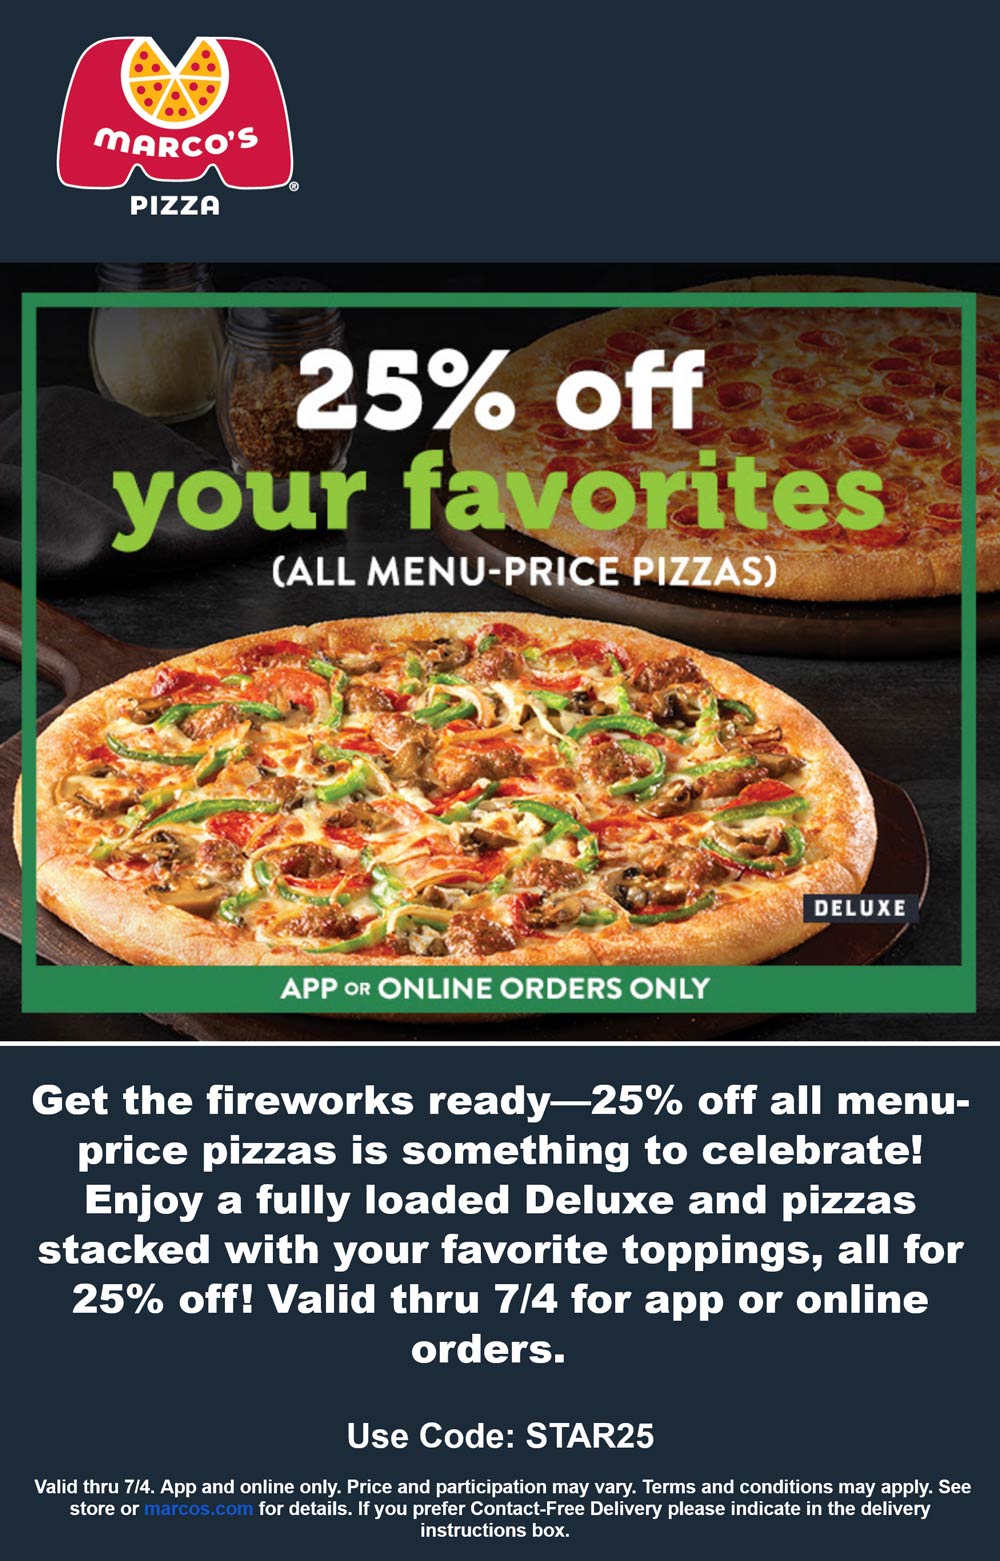 Marcos Pizza restaurants Coupon  25% off at Marcos Pizza via promo code STAR25 #marcospizza 